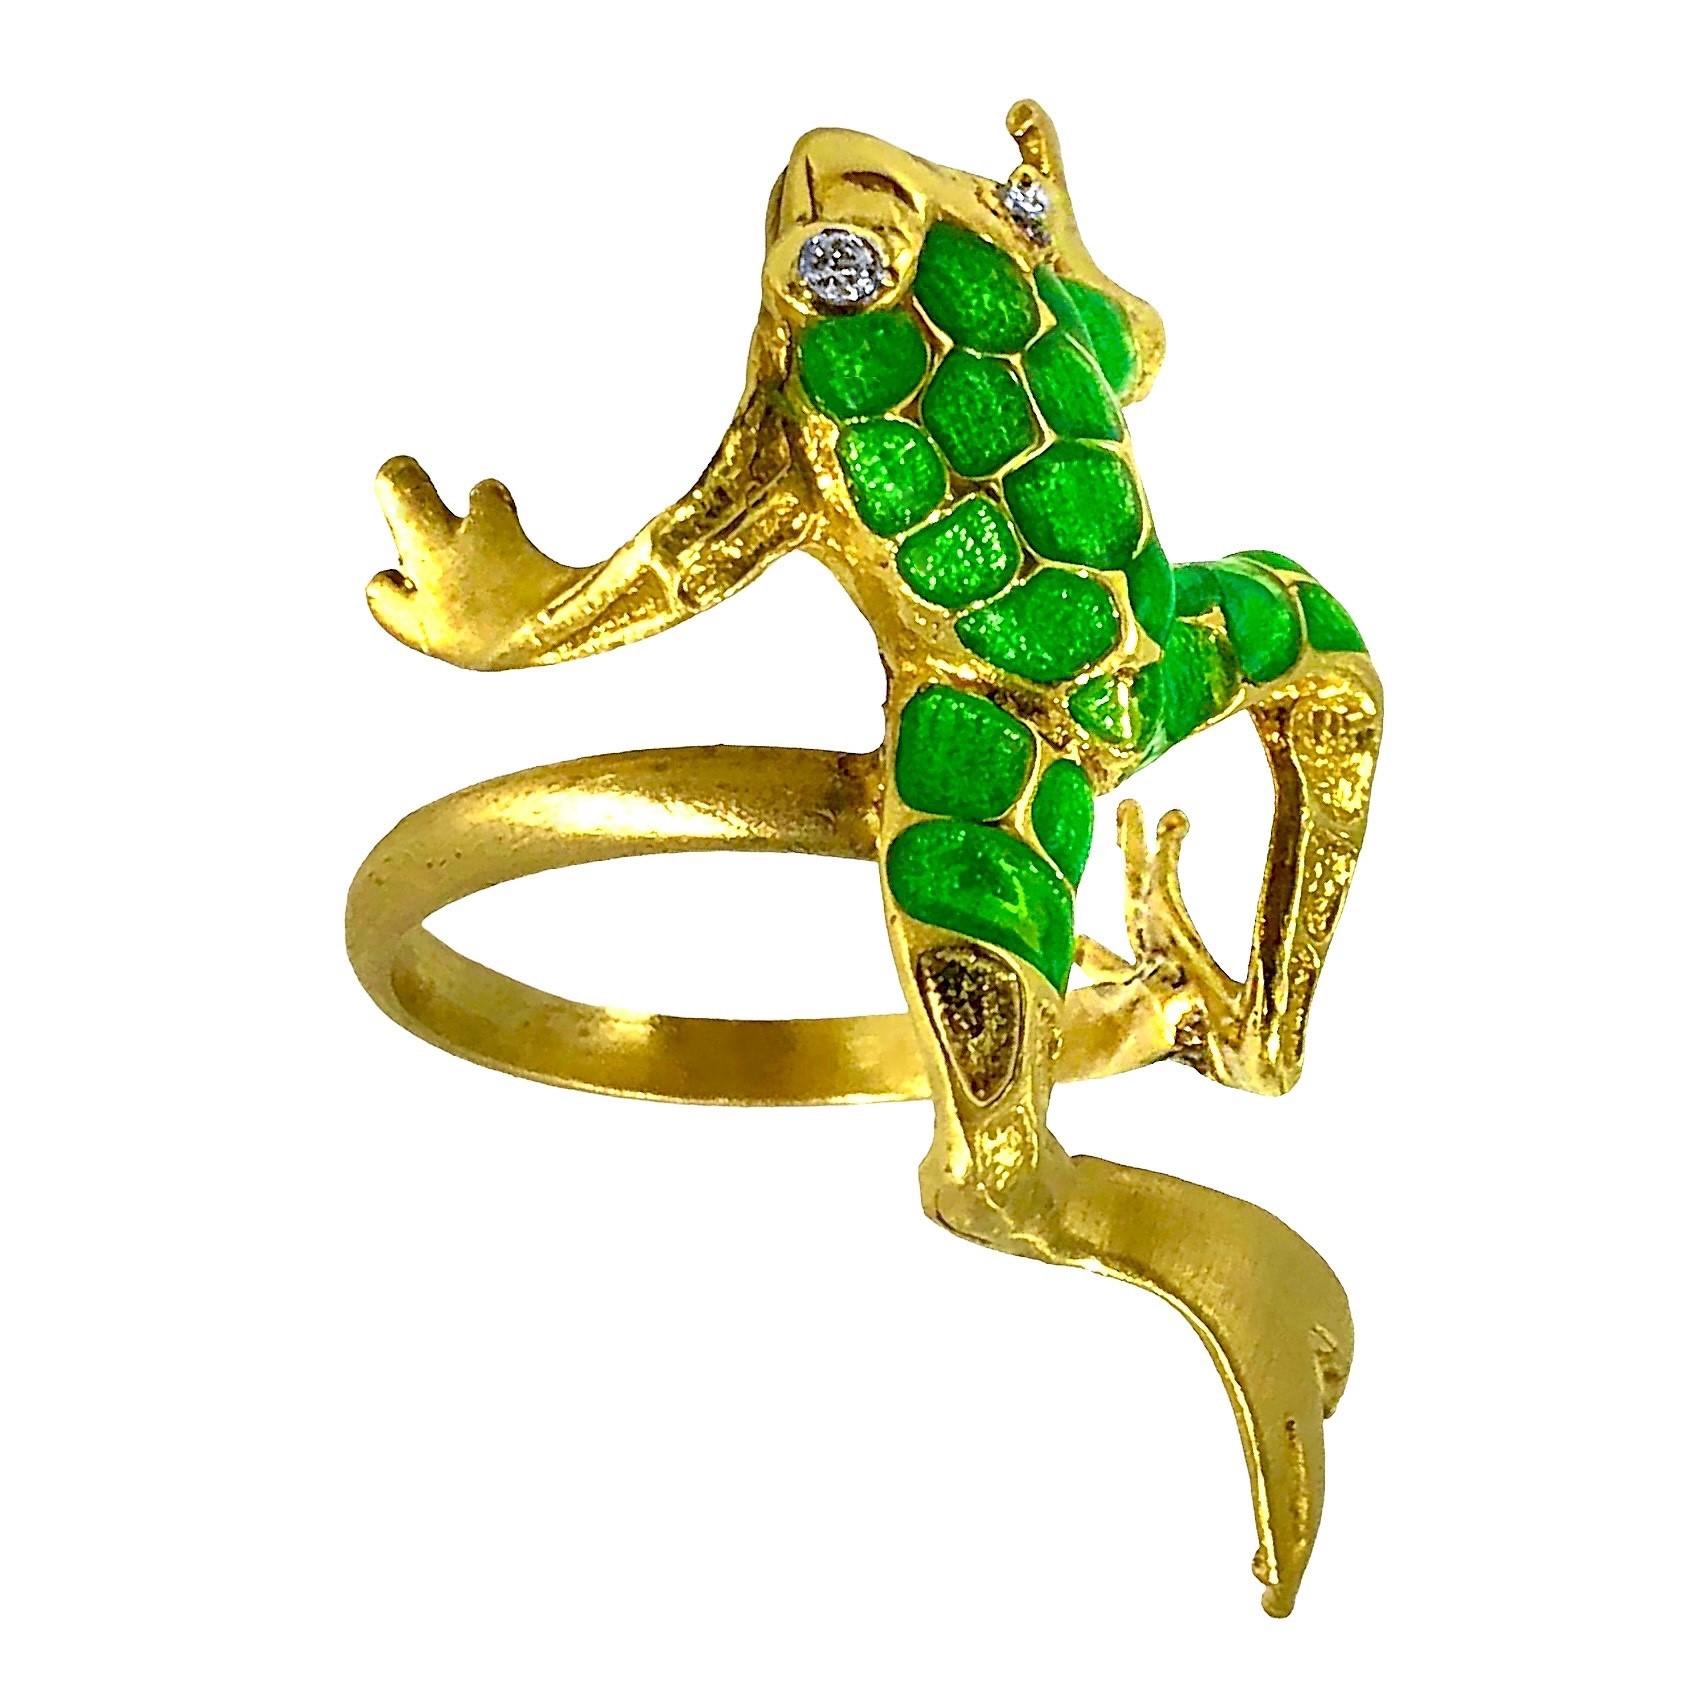 This animated and whimsical frog ring is sure to bring a smile to any observer. Crafted from 18K yellow gold, the deftly fashioned areas are covered in vibrant green enamel. The eyes are set with sparkling diamonds, having a total approximate weight